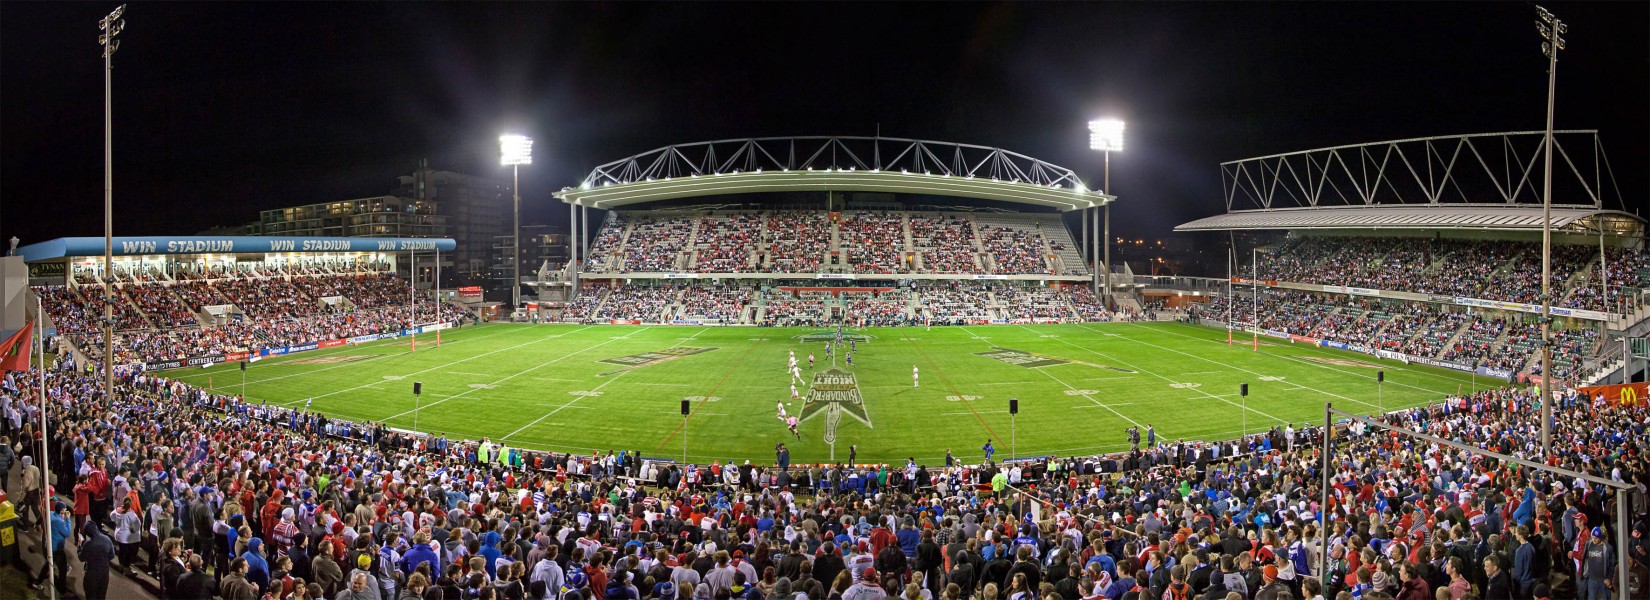 Wollongong’s WIN Stadium to make rugby league history